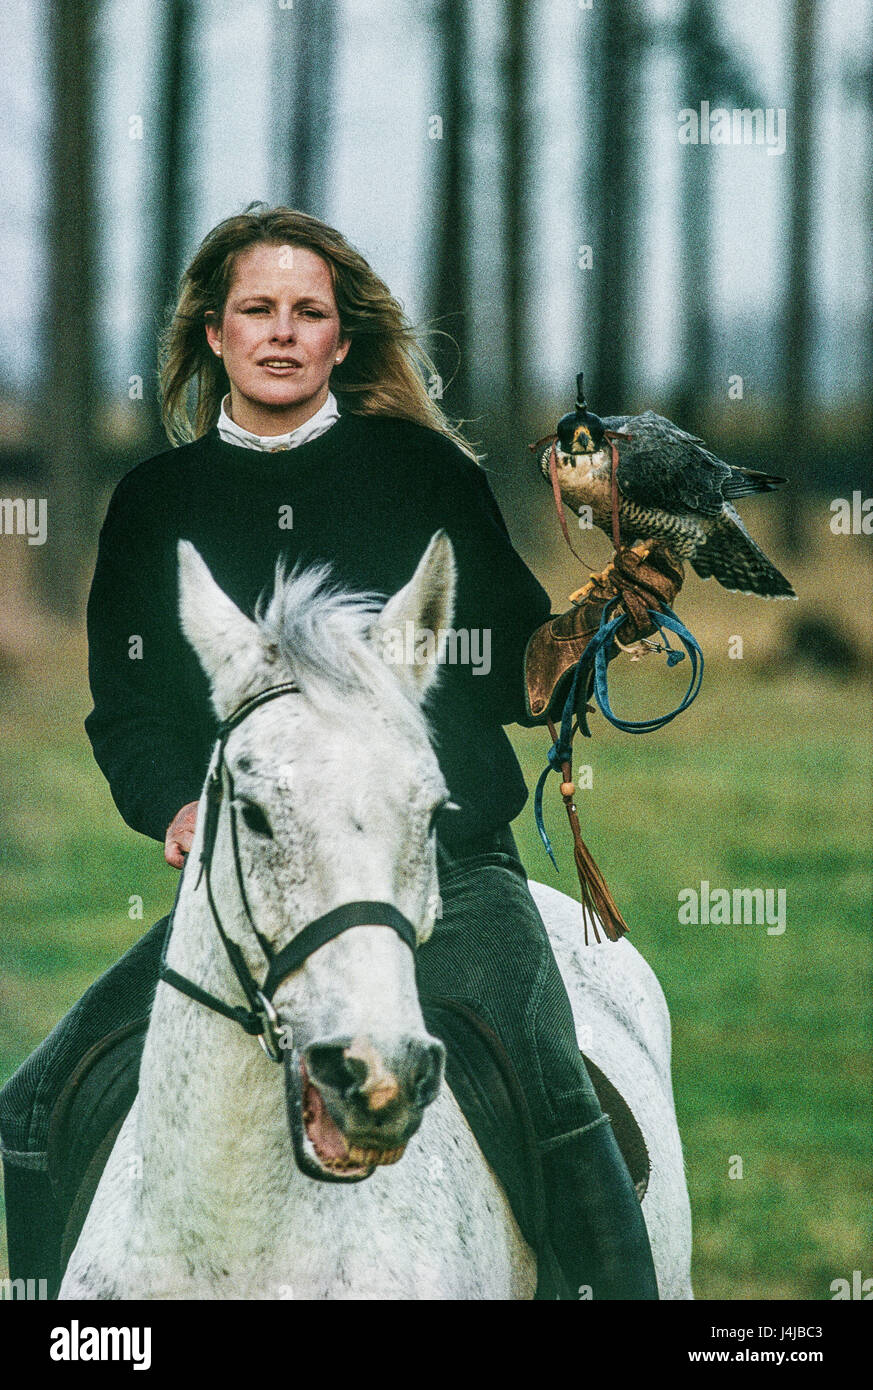 Falconer Emma Ford carrying a falcon in her gloved hand while riding a white horse near Gleneagles, Scotland. Stock Photo